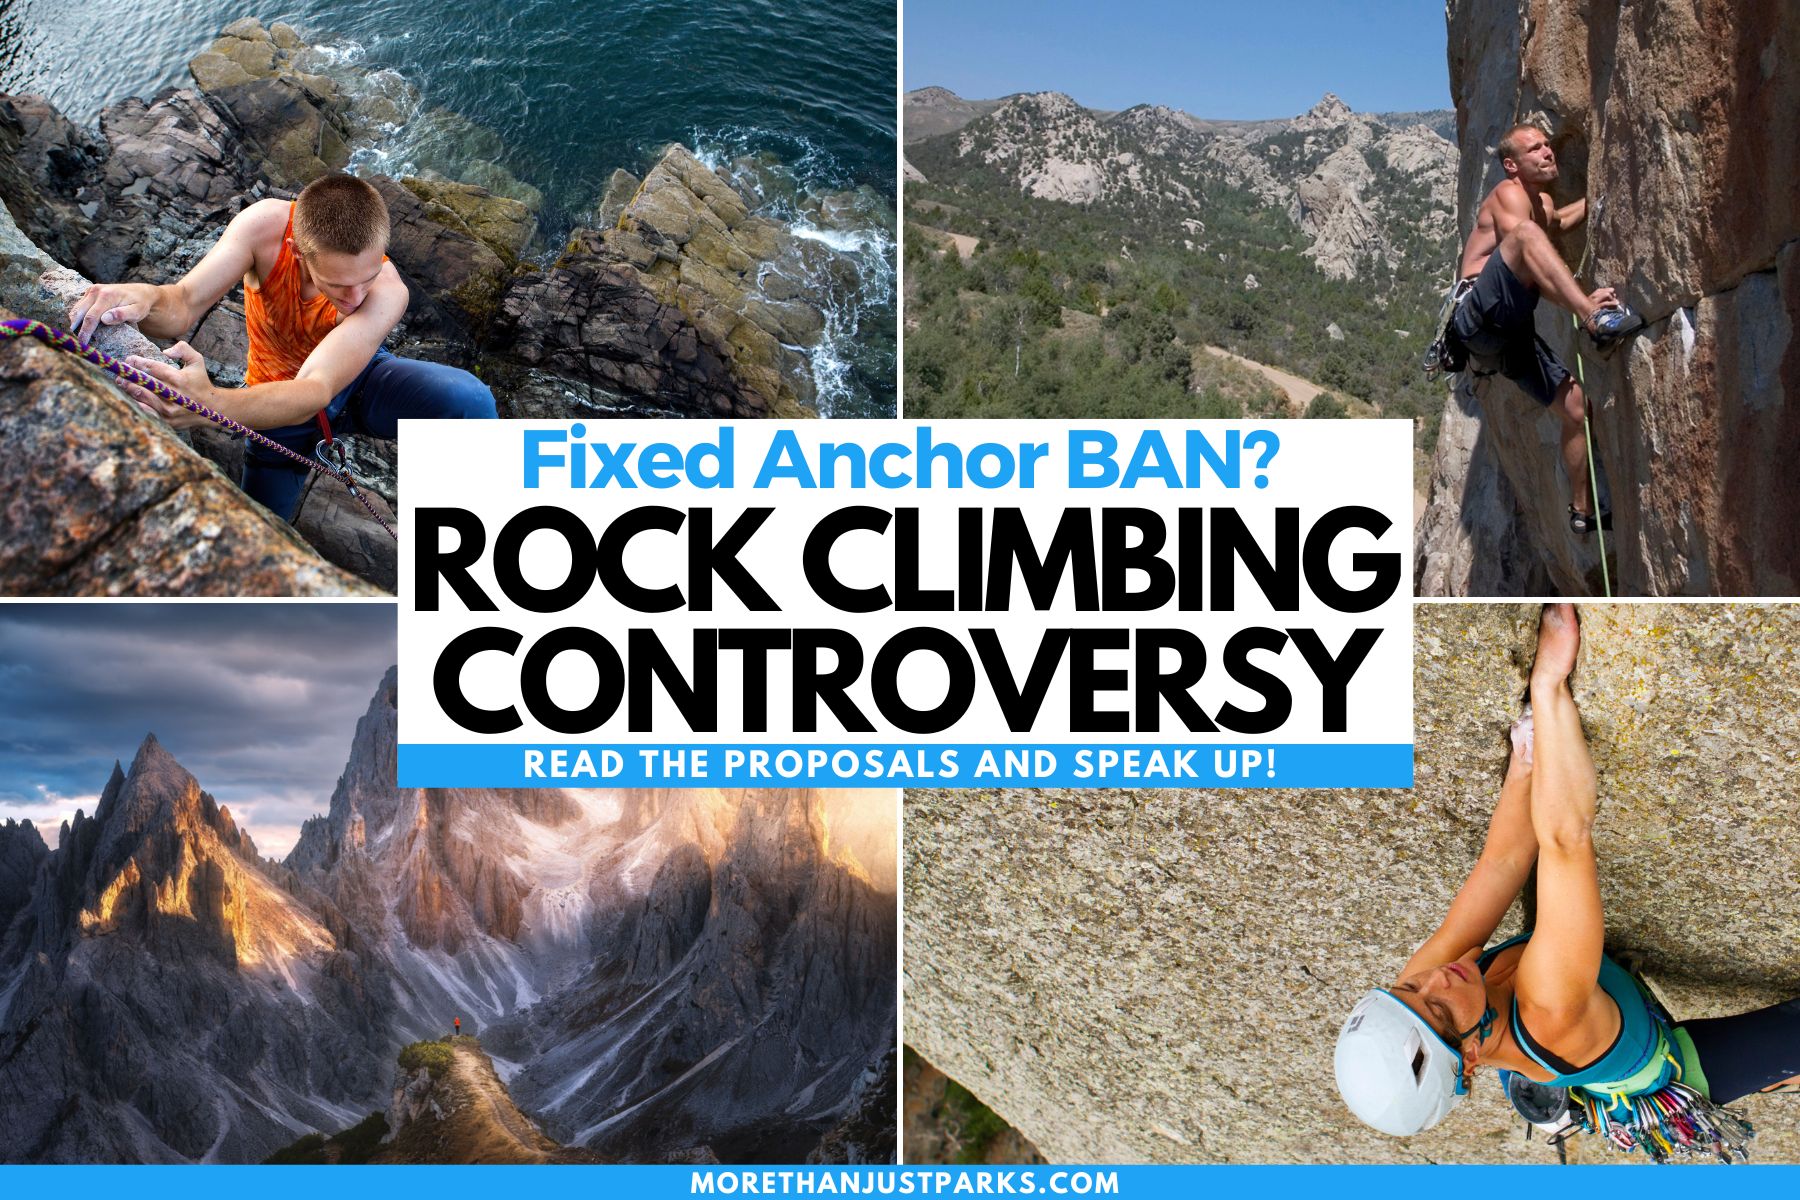 Graphic reads "Fixed Anchor Ban? Rock Climbing Controversy. Read the proposals and speak up!"